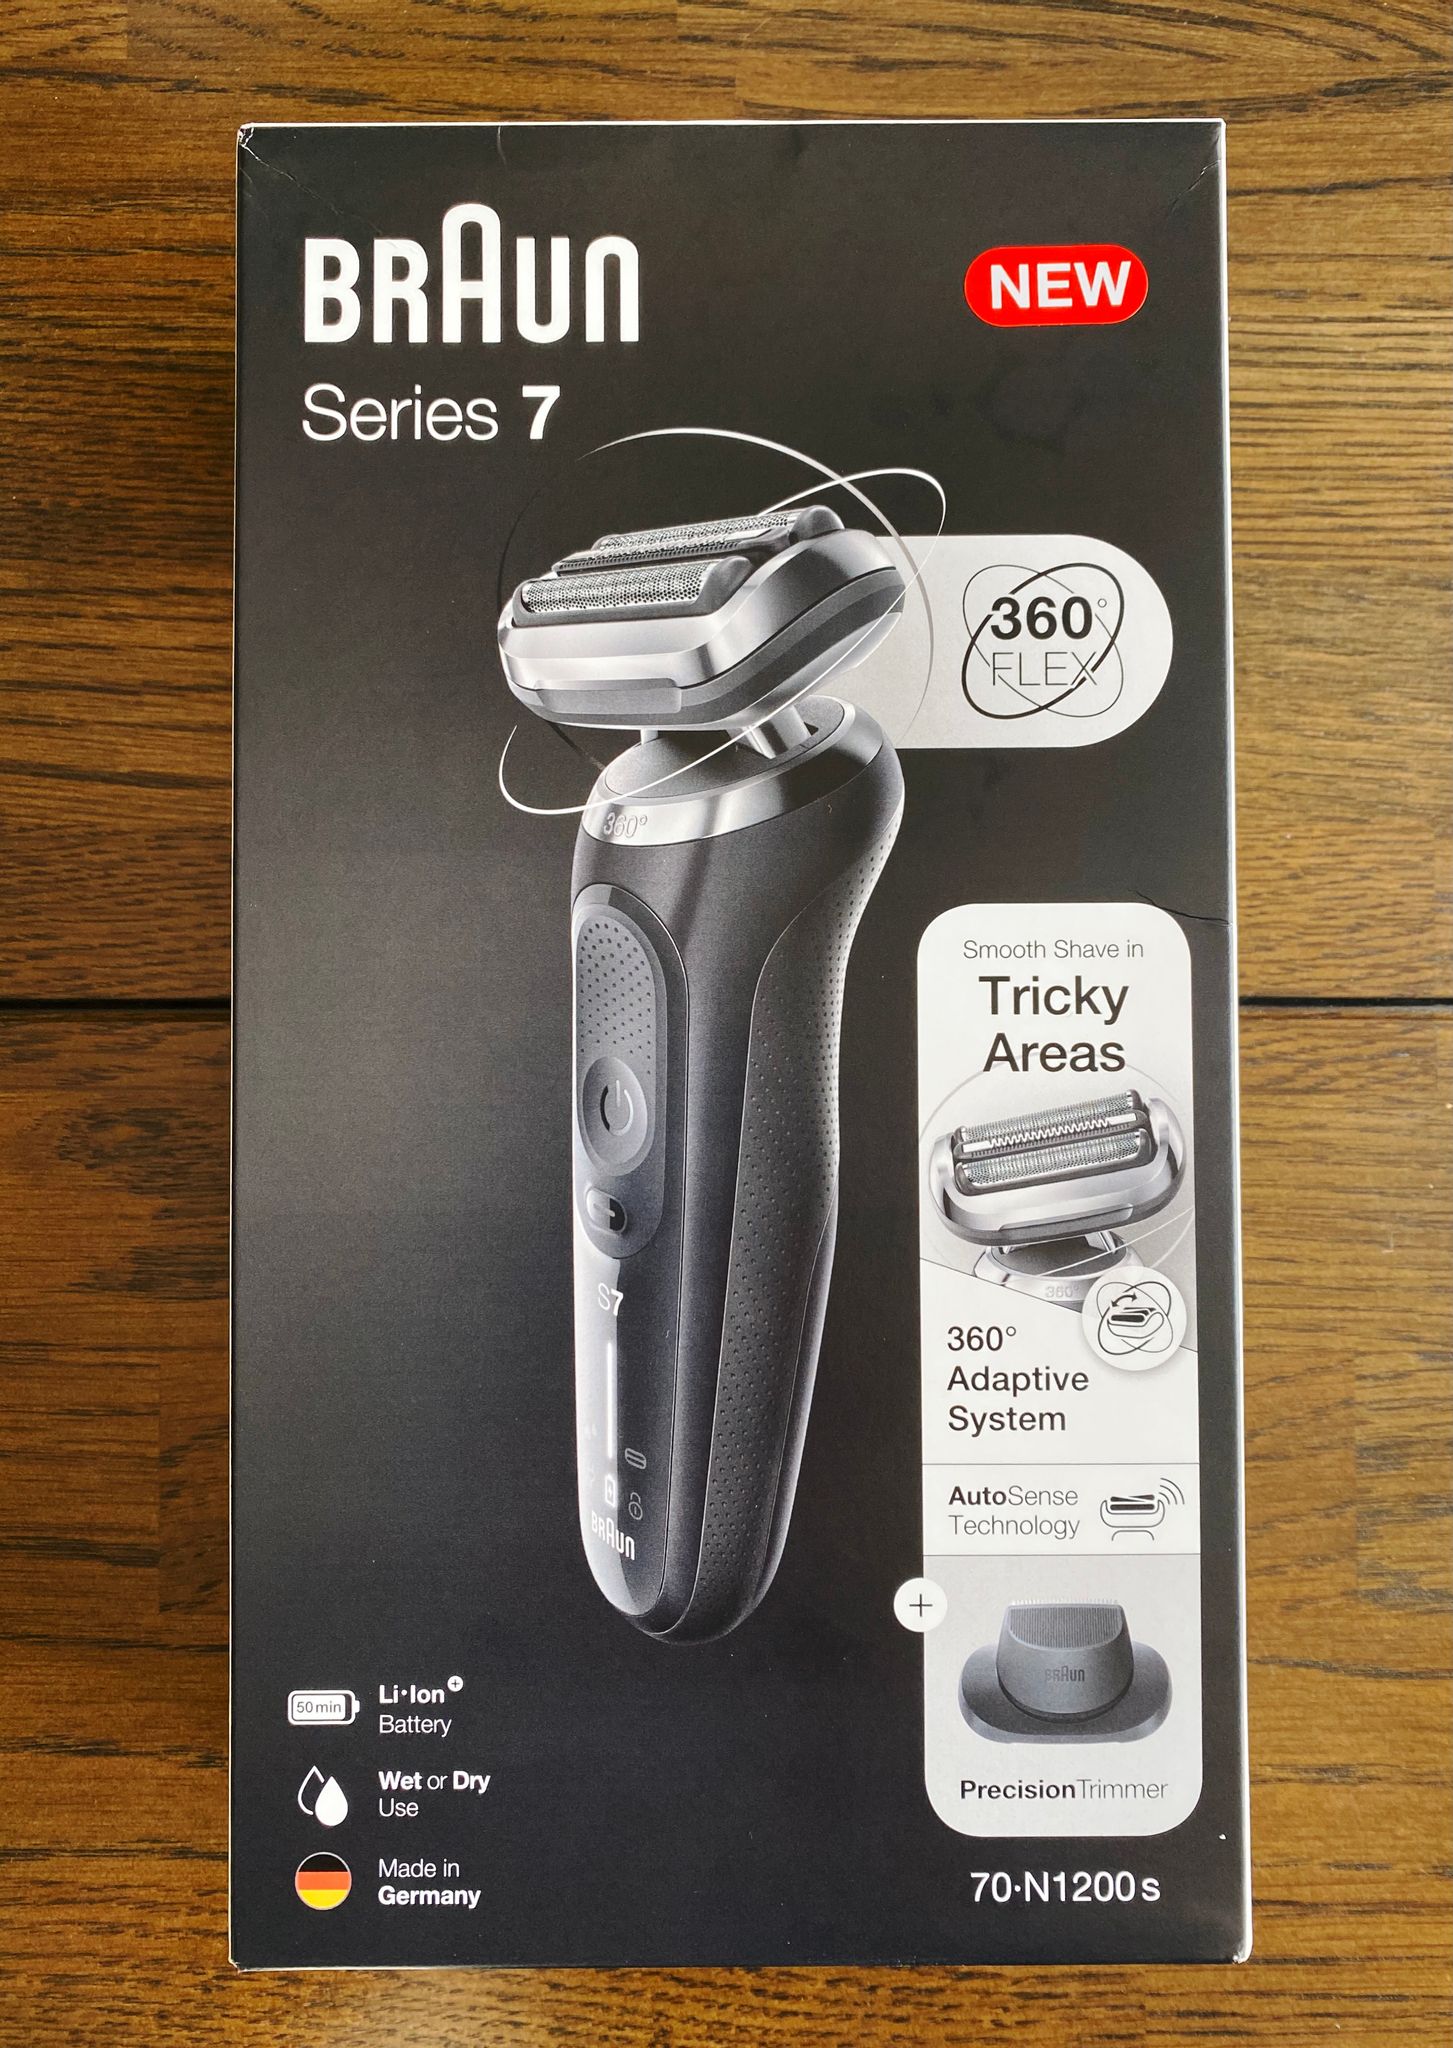 A photo of the box of a Braun Series 7 electric razor.